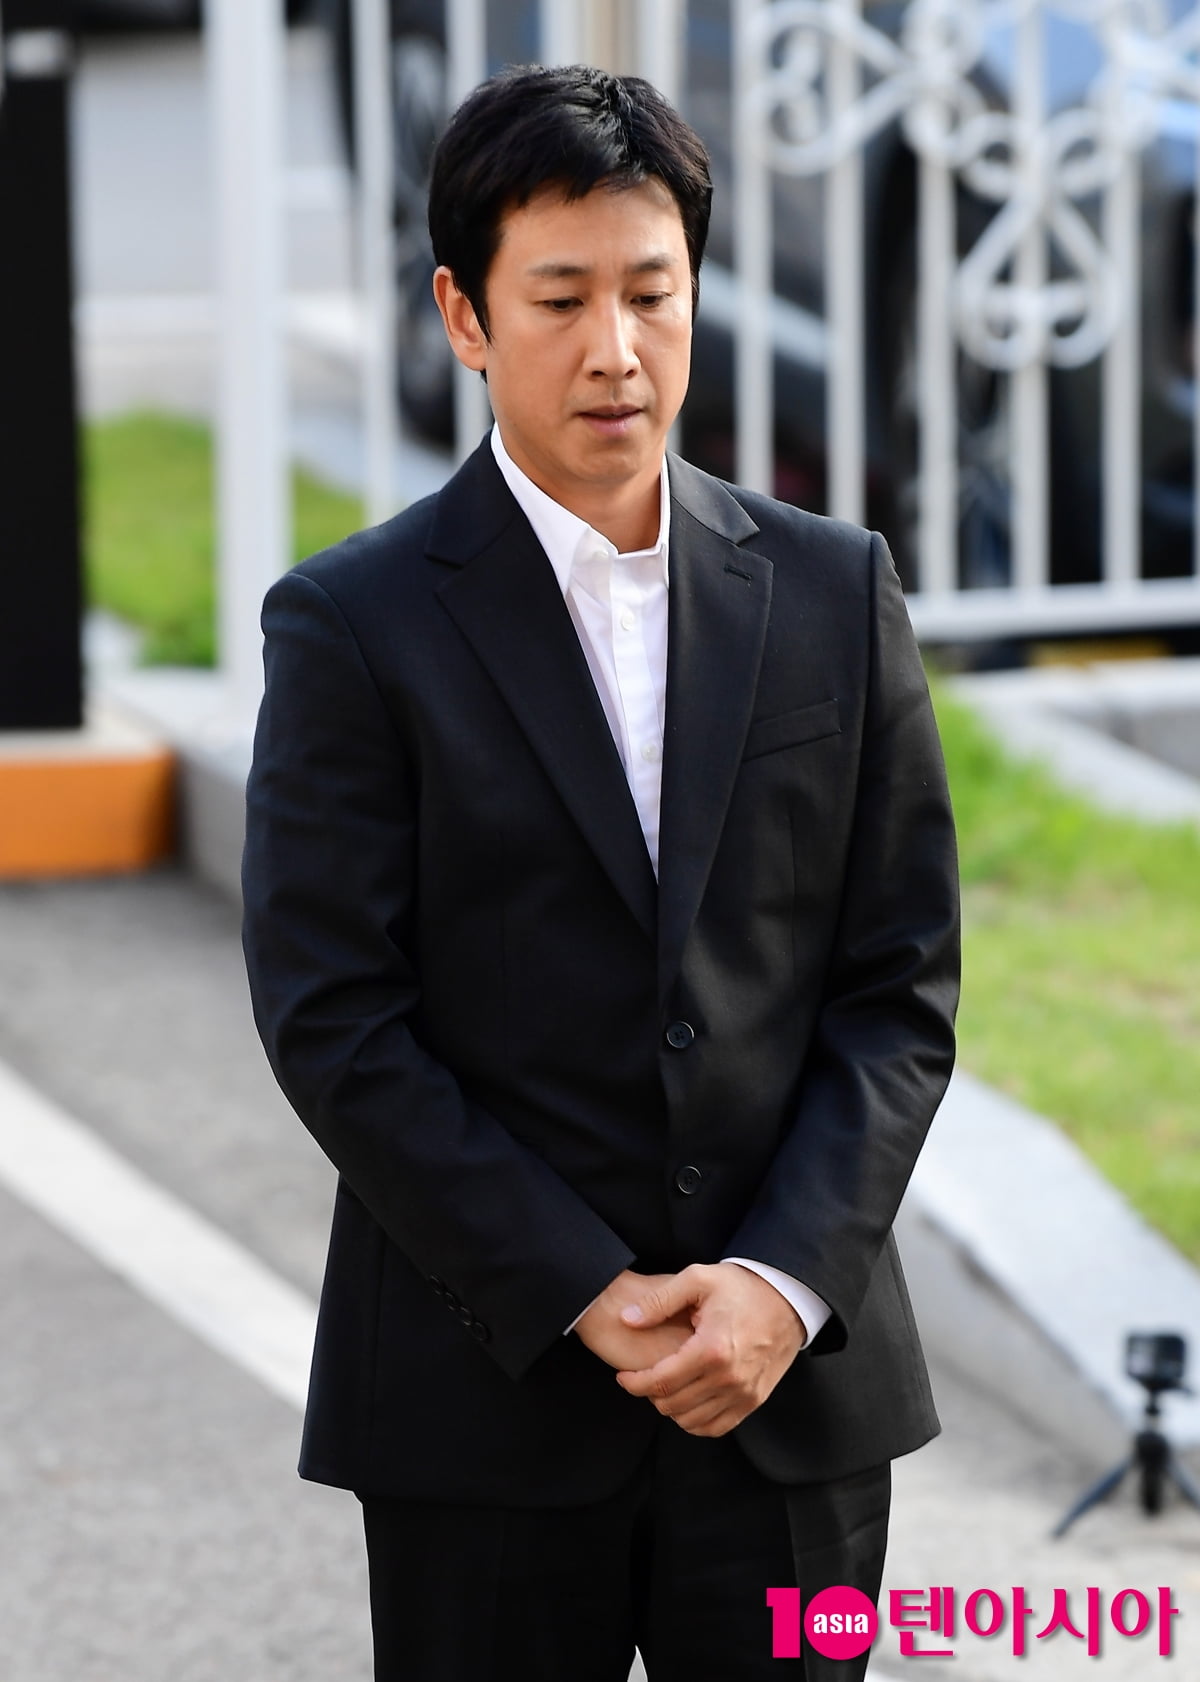 Lee Seon-gyun, who was 'silent' when asked about the charges, tested negative on a simple drug reagent test.